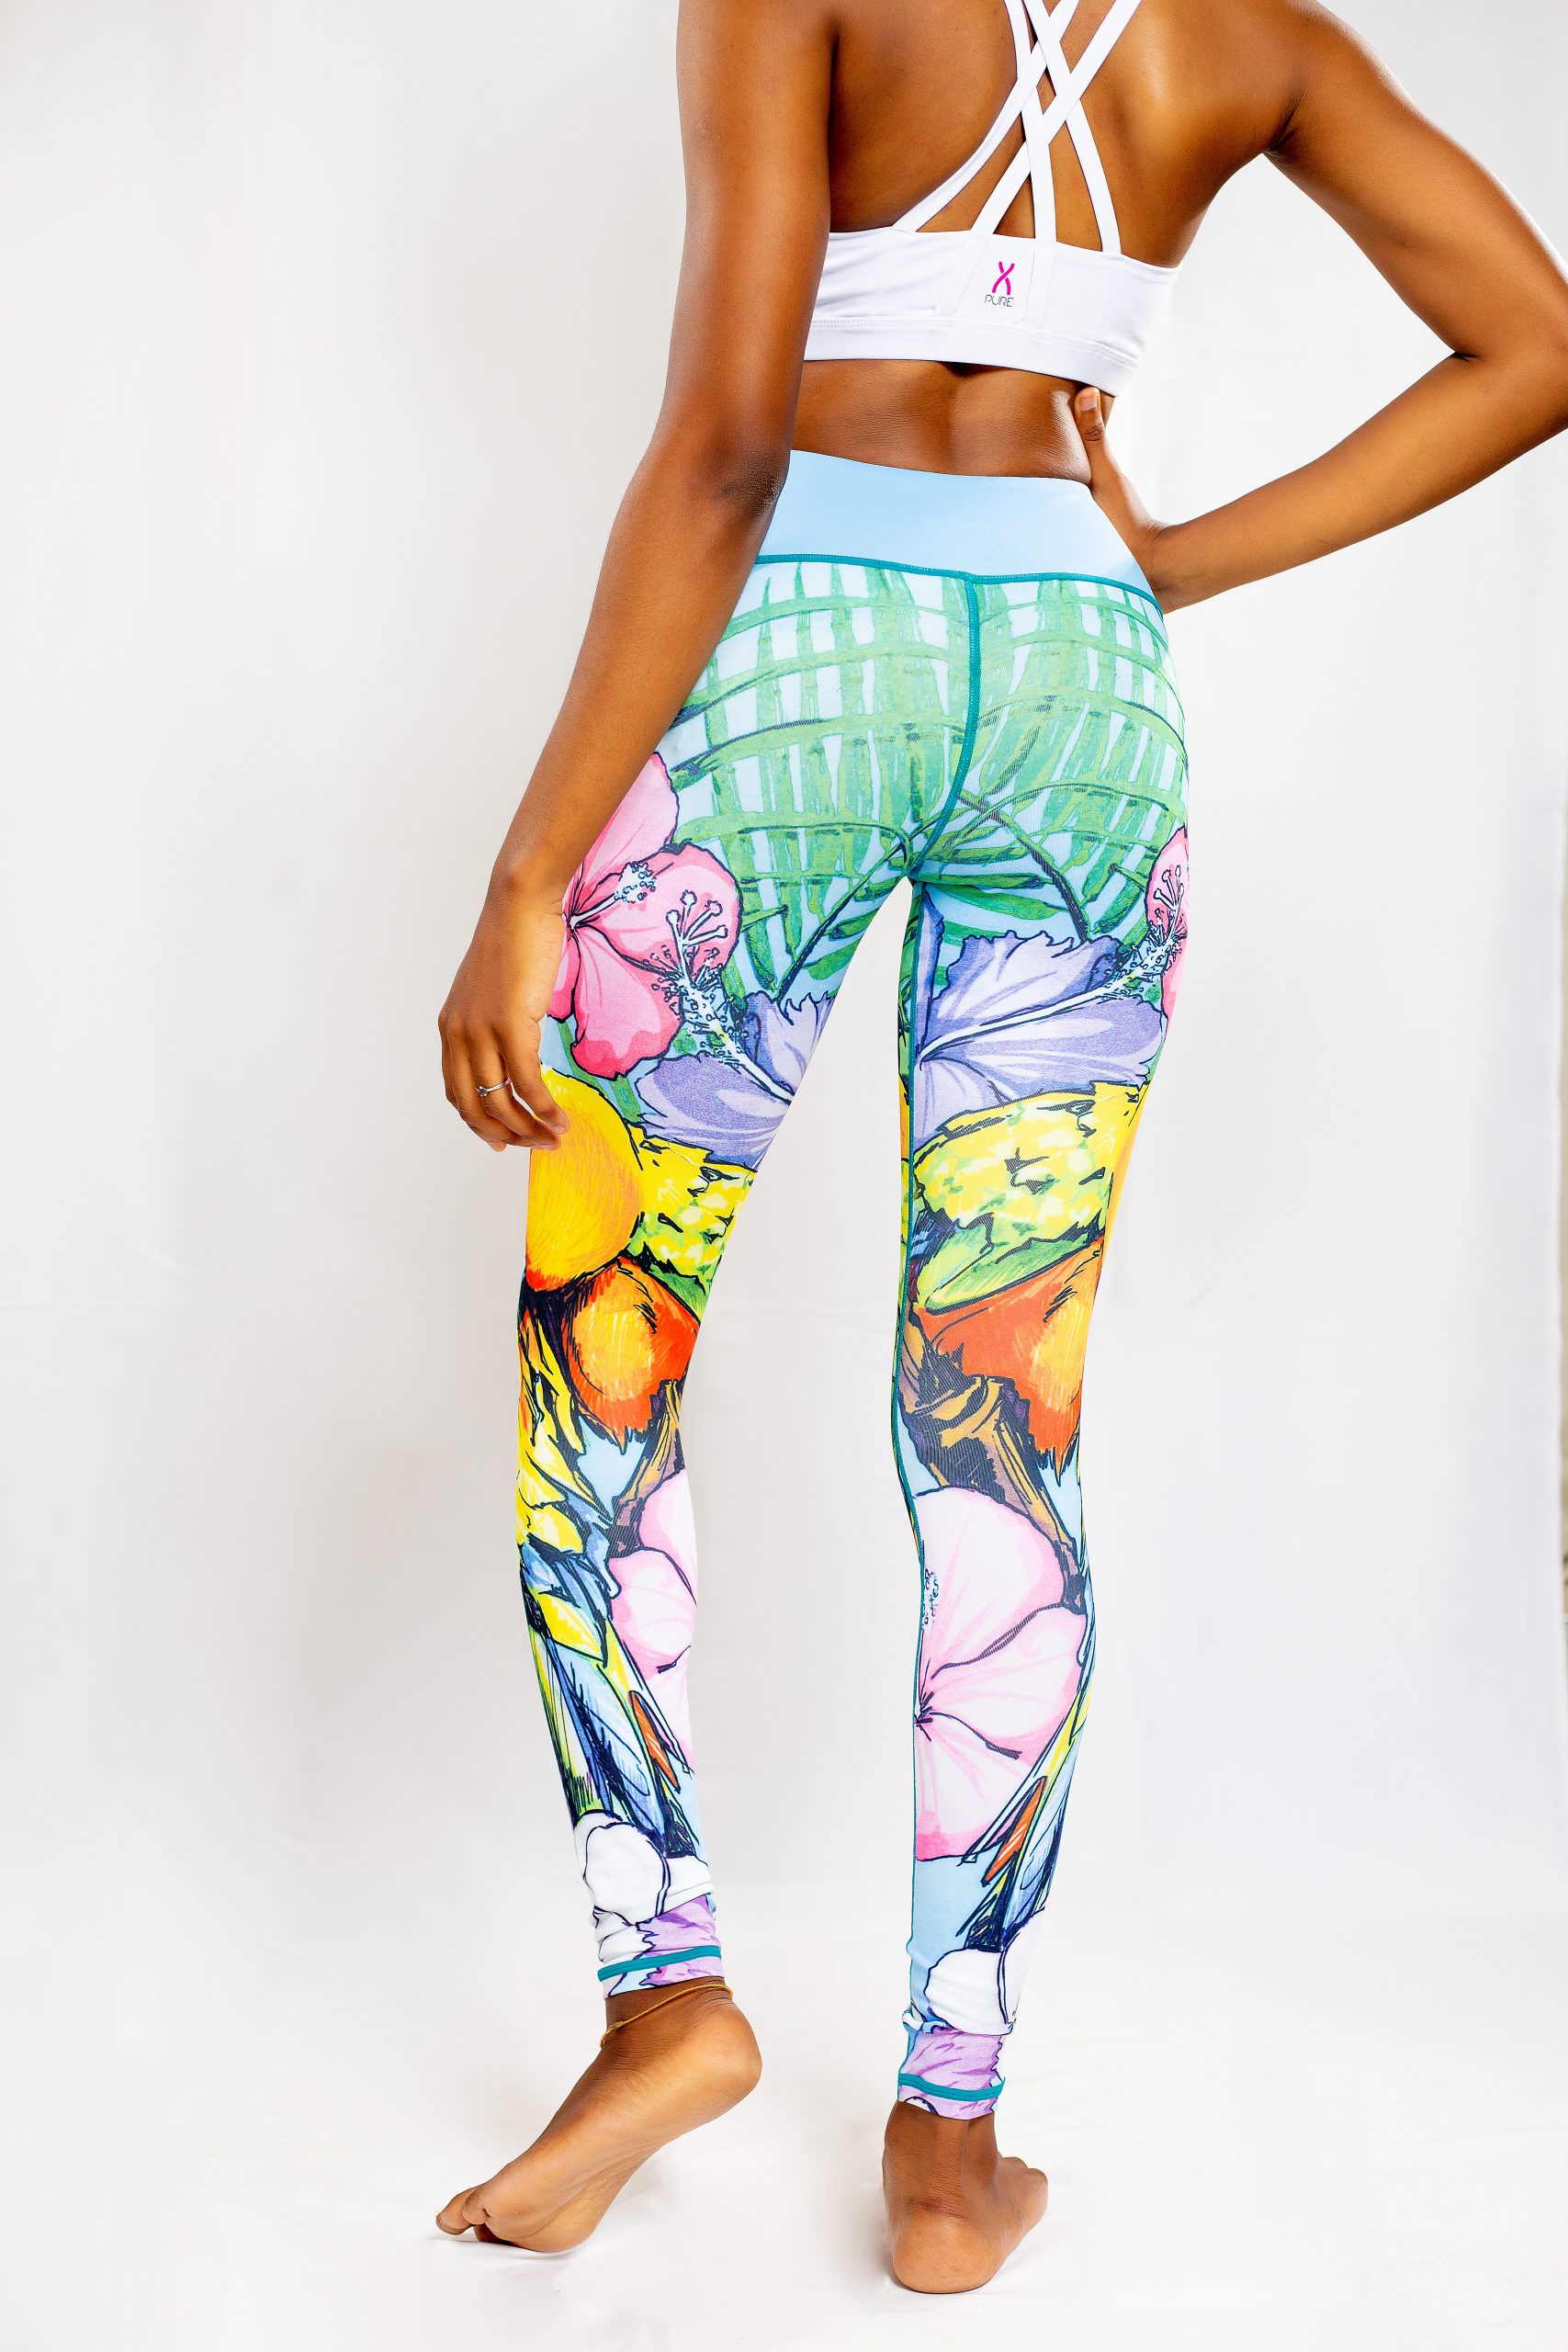 Oceanic Pants - Pure fitness | Online shop for workout outfit